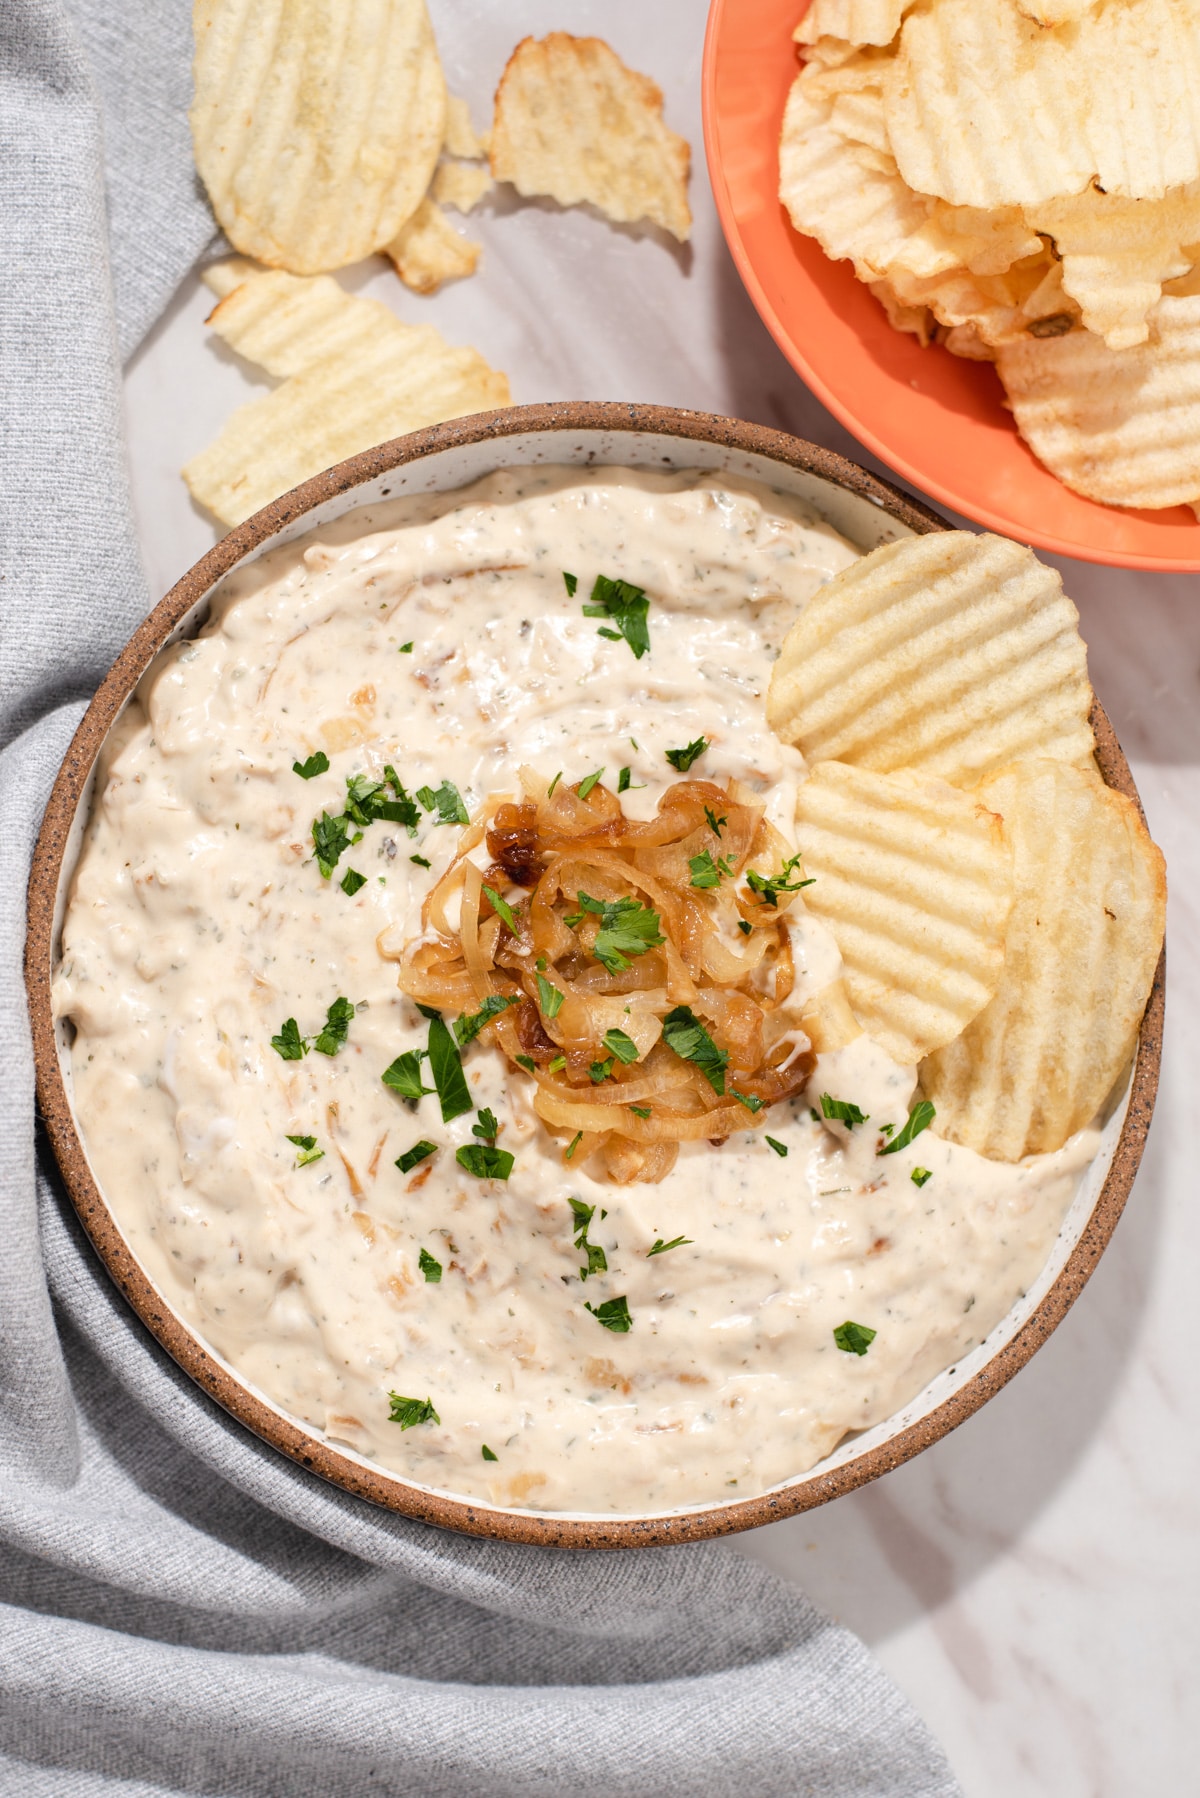 Overhead view of bowl filled with onion dip, caramelized onions, and potato chips